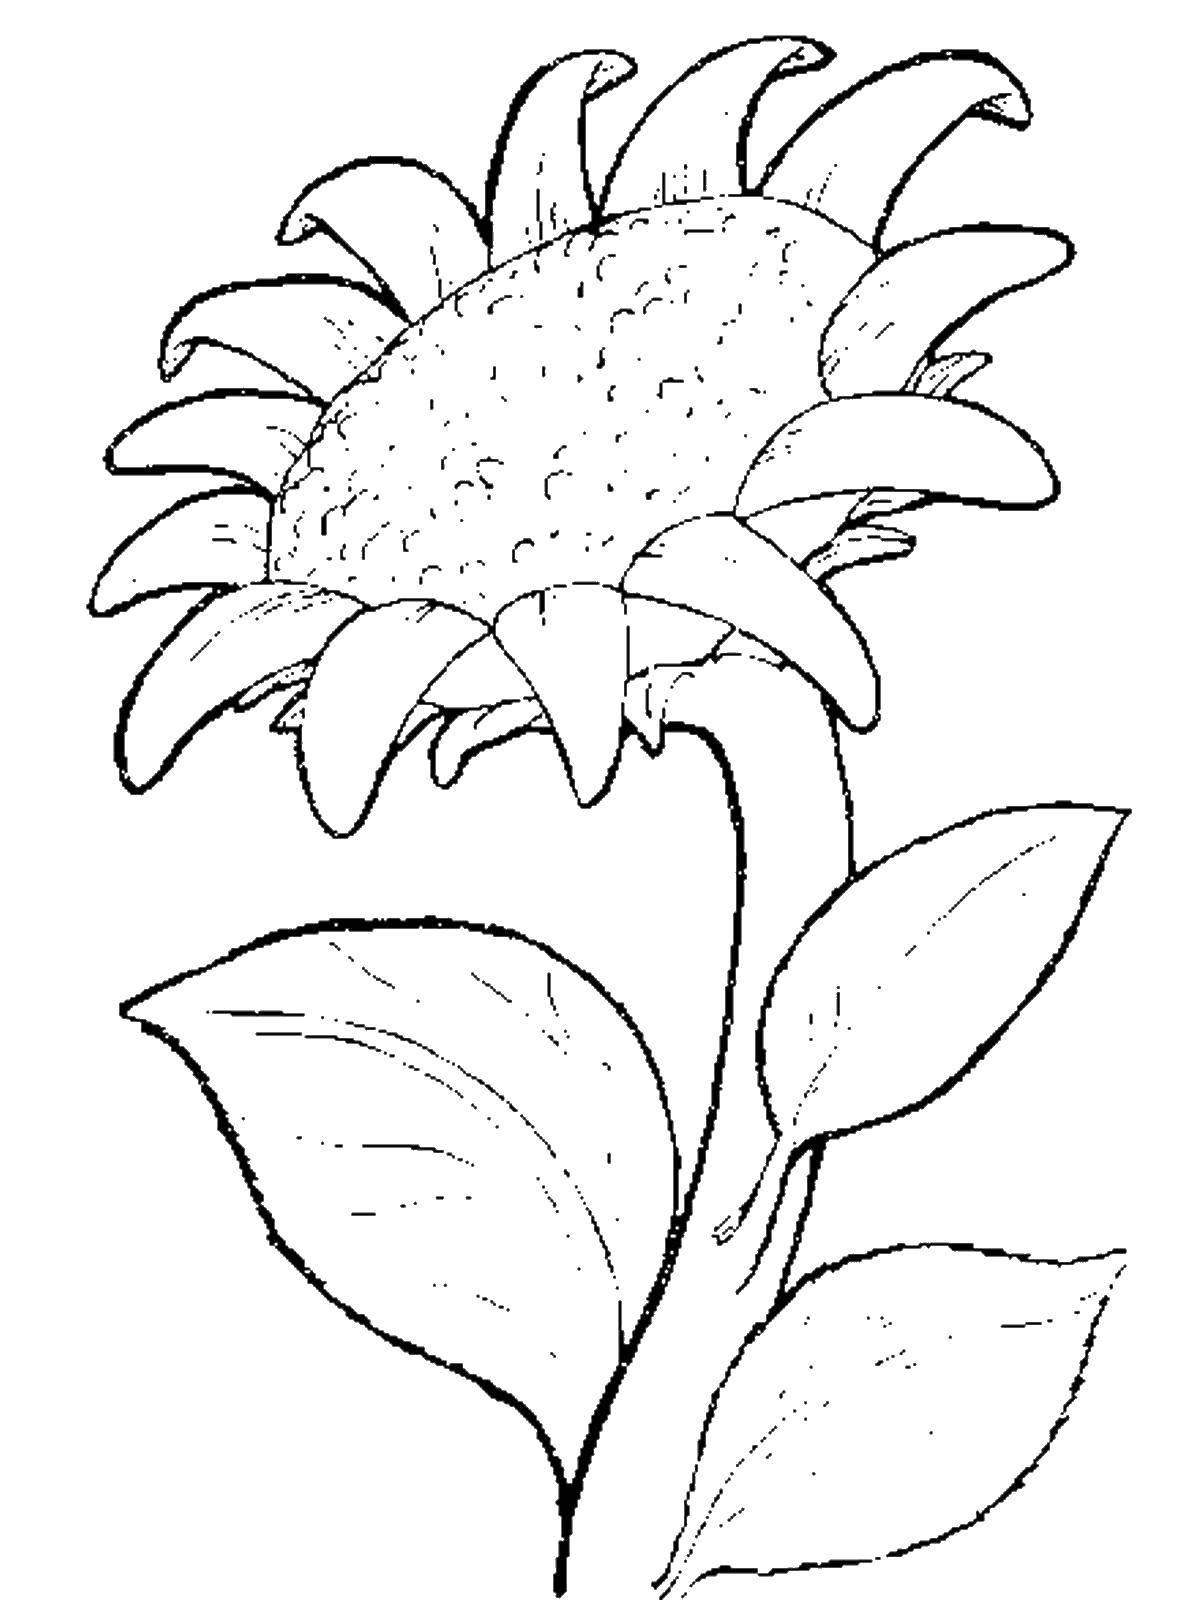 Coloring Sunflower. Category flowers. Tags:  Sunflower.